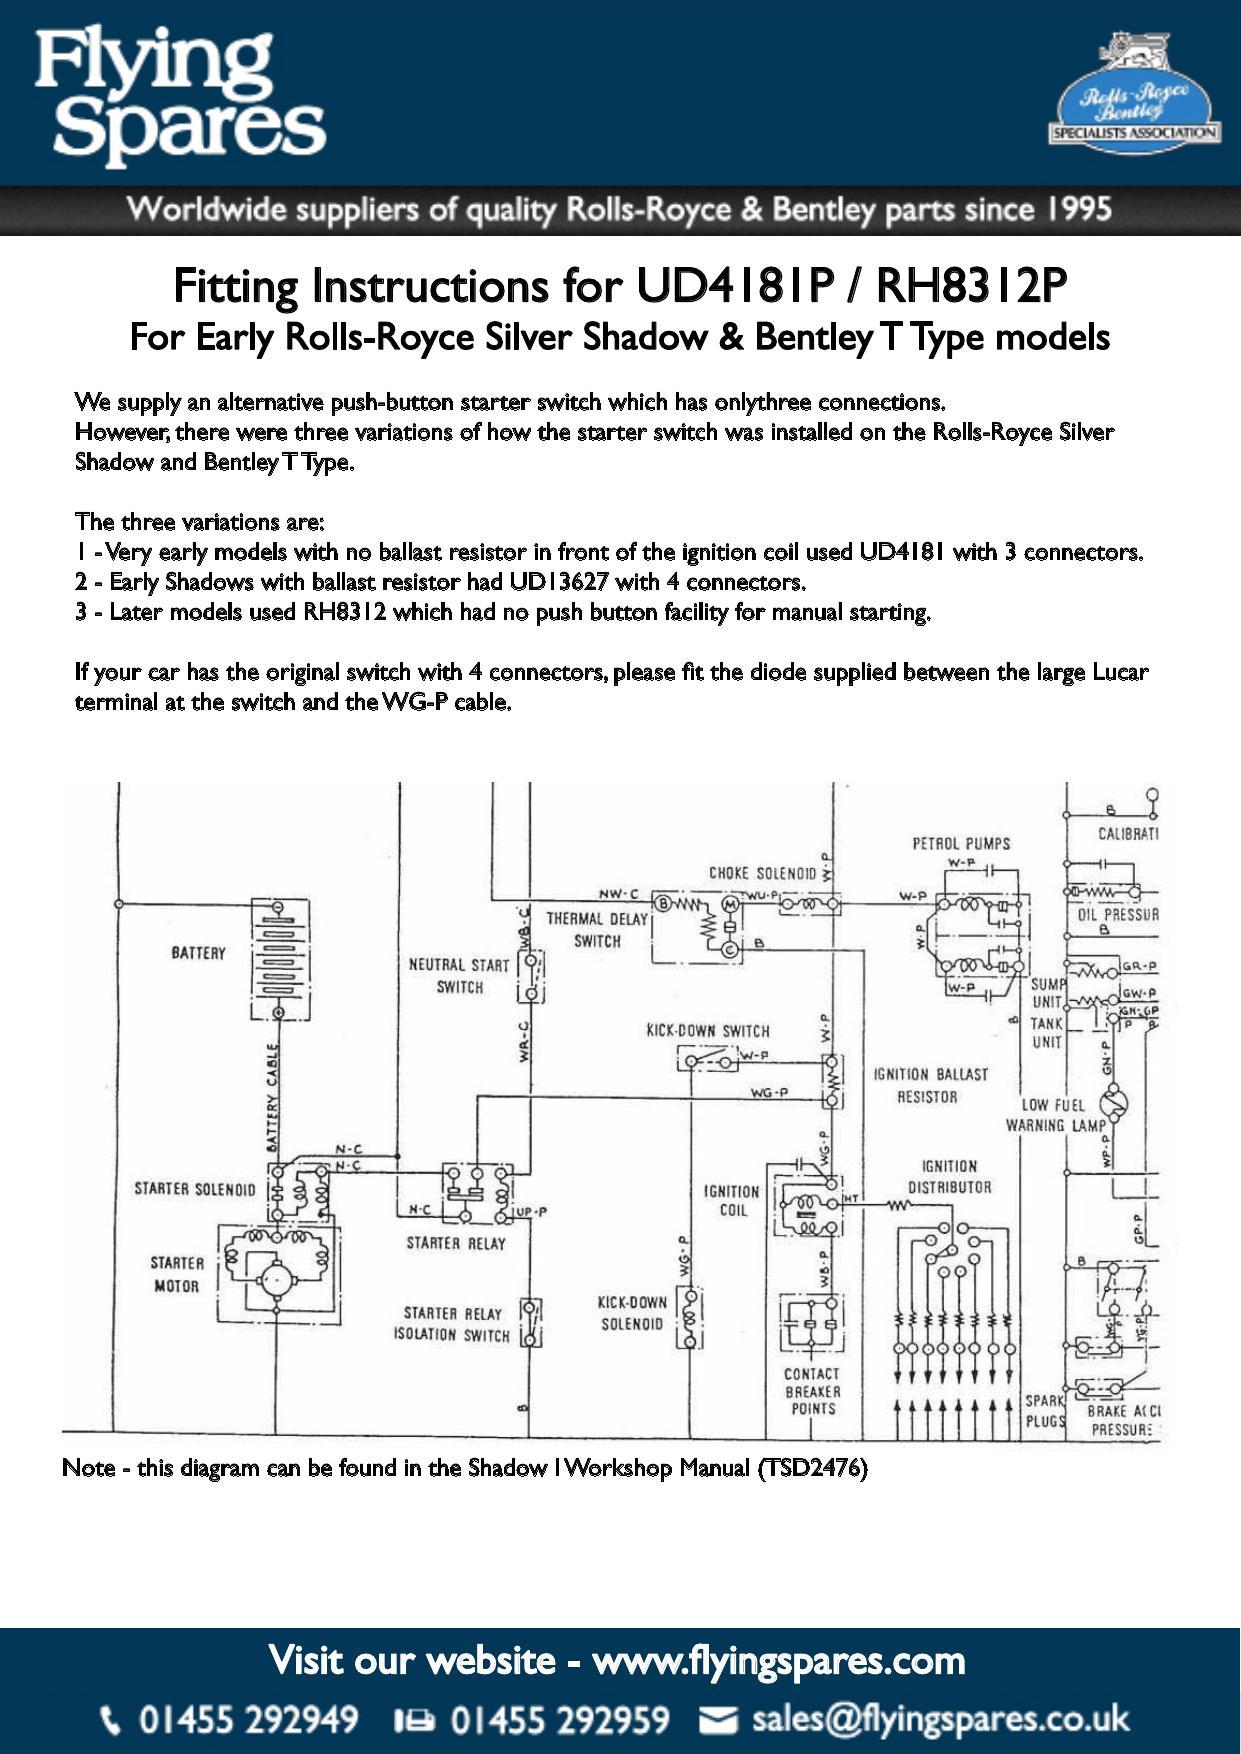 fitting-instructions-for-ud4i8ip-rh83-for-early-rolls-royce-silver-shadow-bentley-t-type-models.pdf